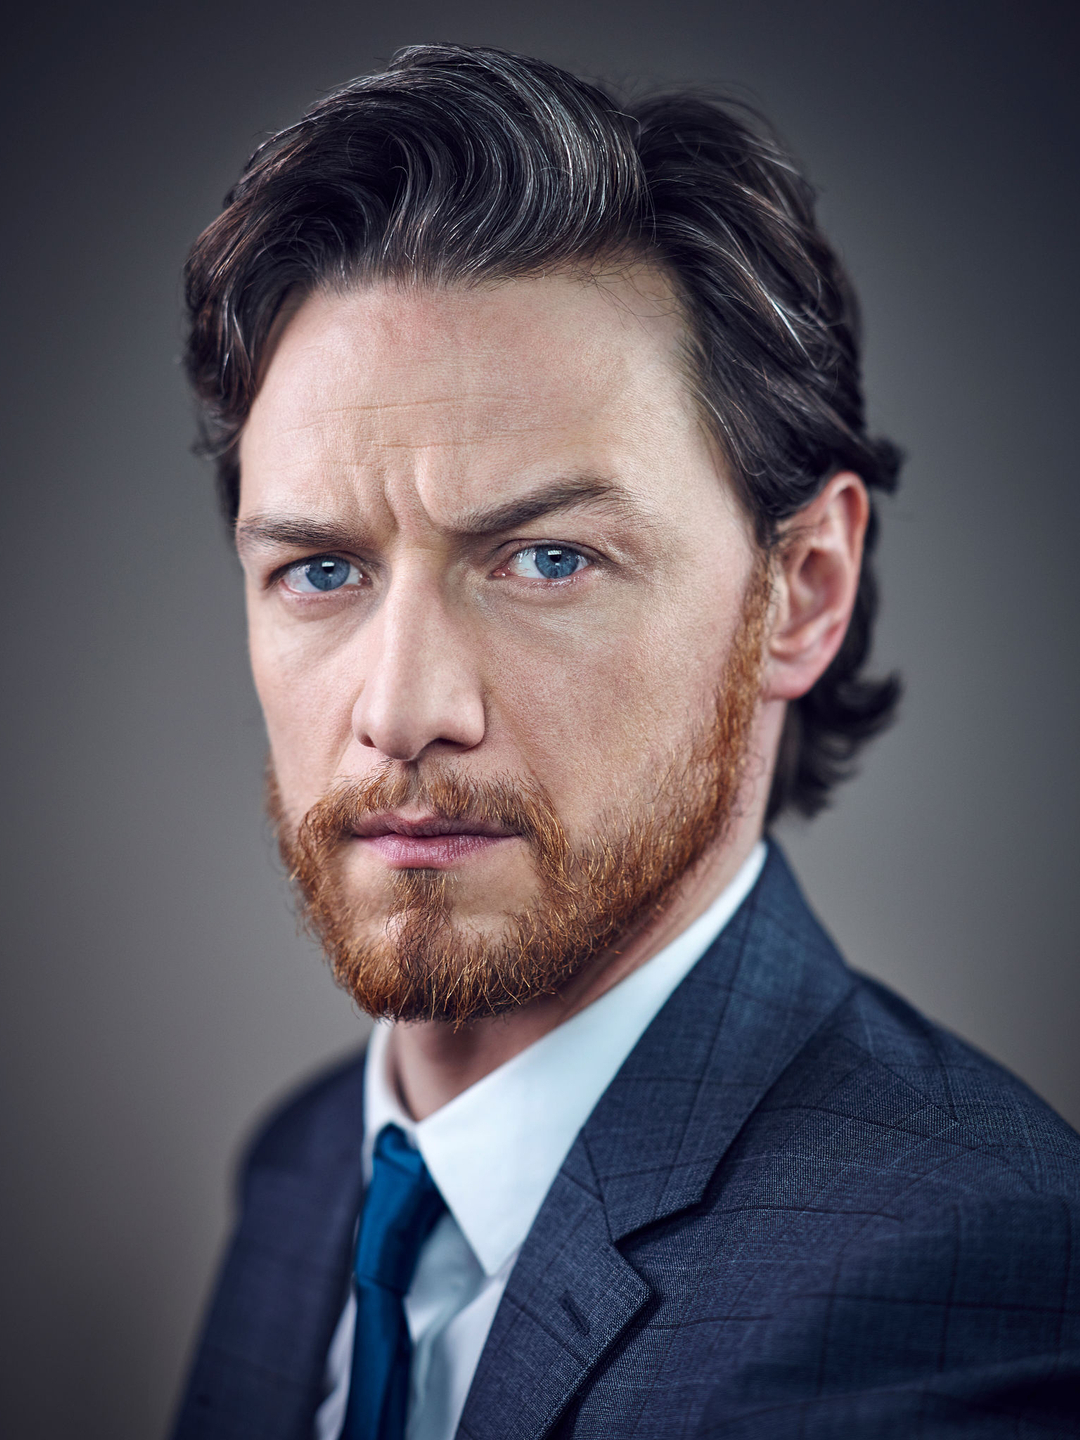 James McAvoy dating history